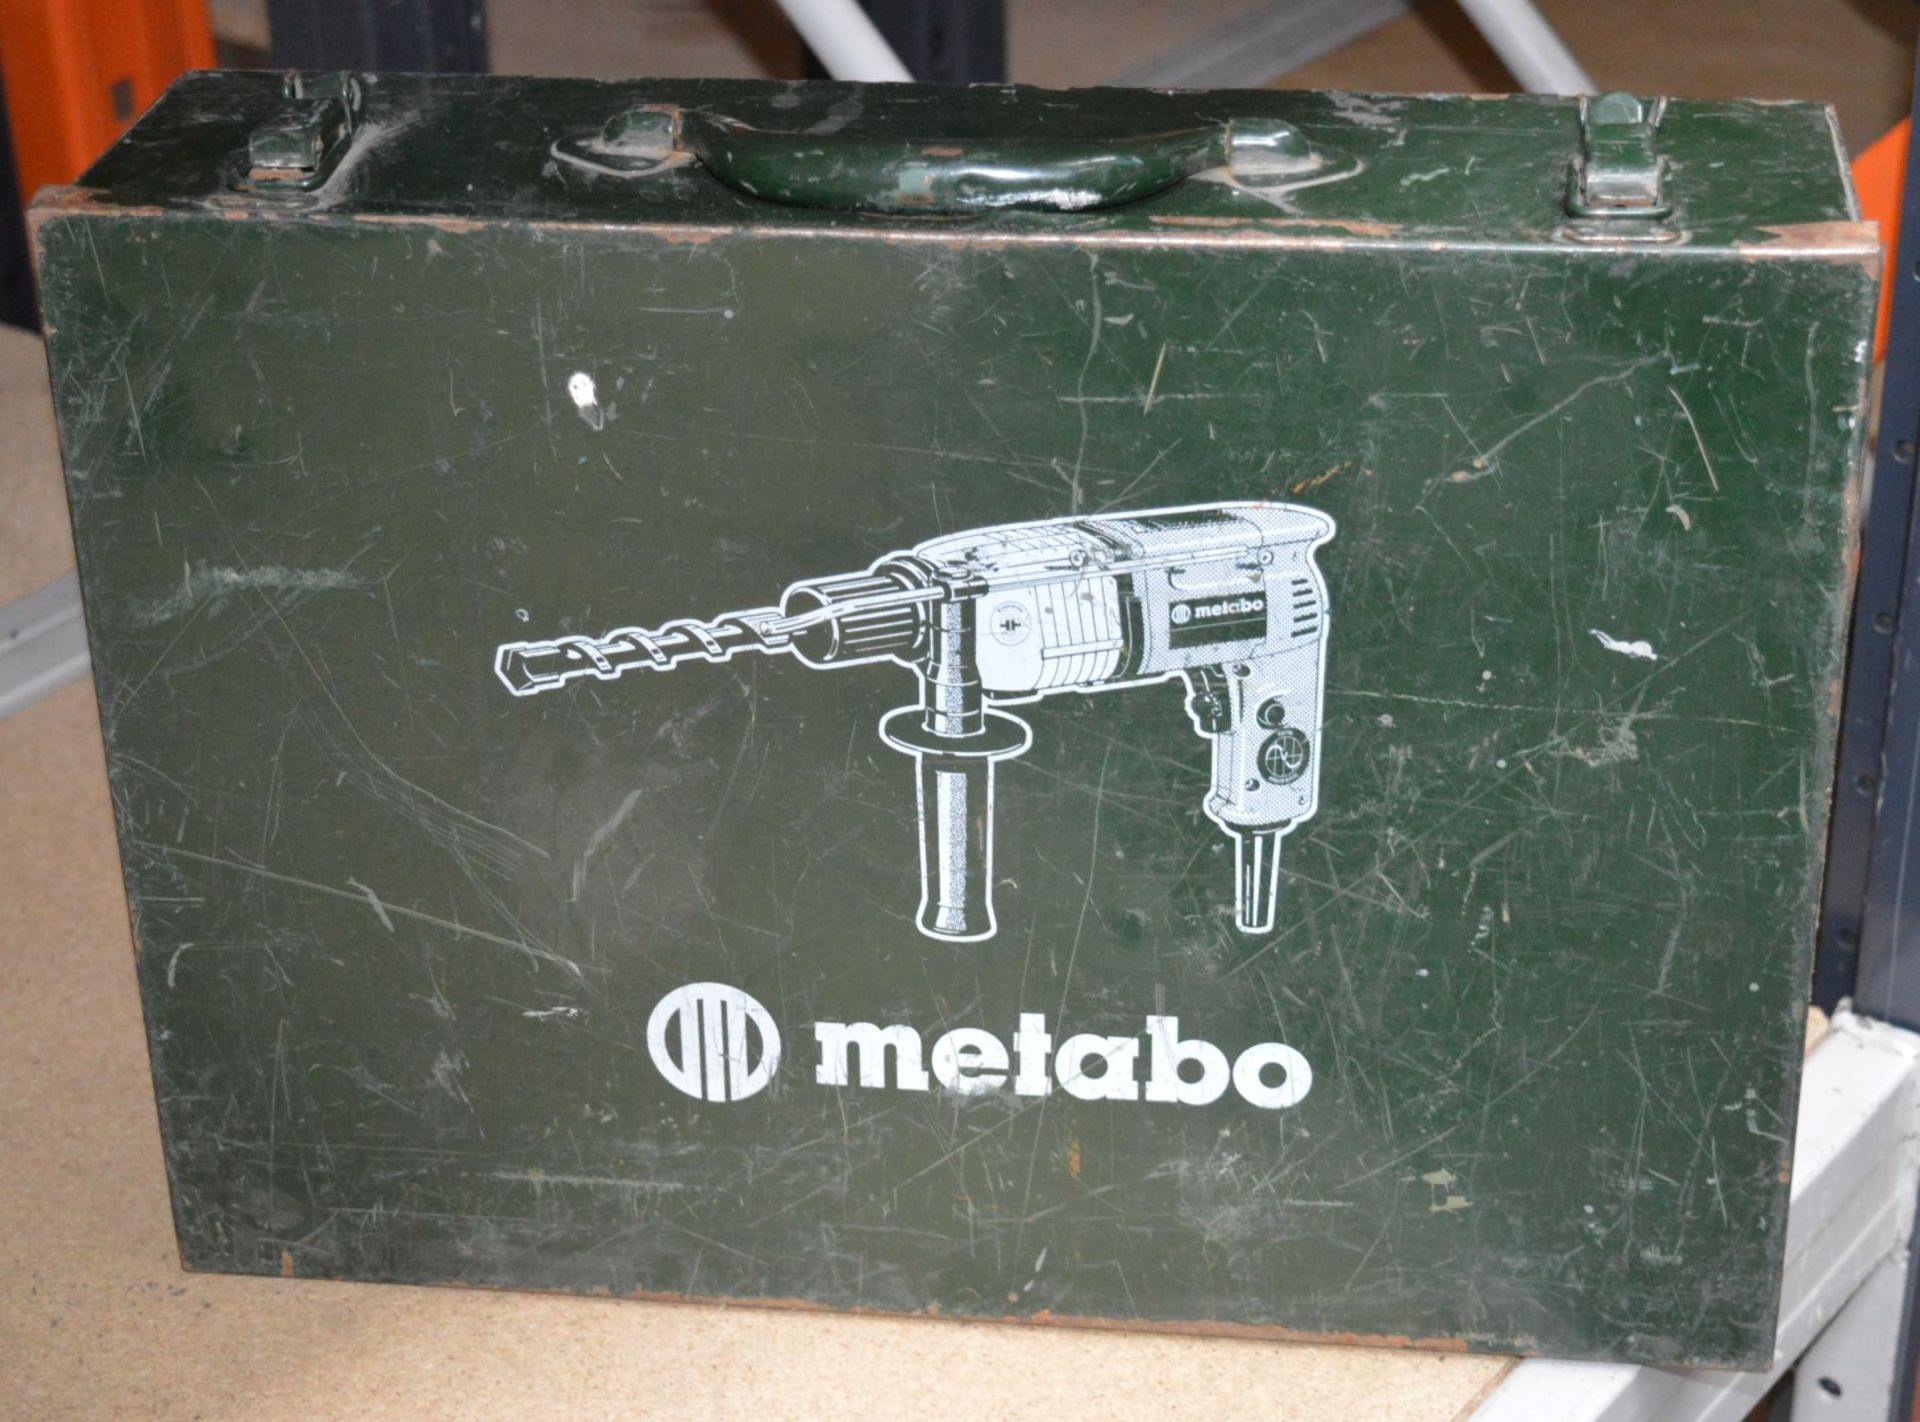 1 x Metabo Hammer Drill - 110v - Model BHE75 - Includes Protective Case - Tested and Works - CL300 - - Image 4 of 5